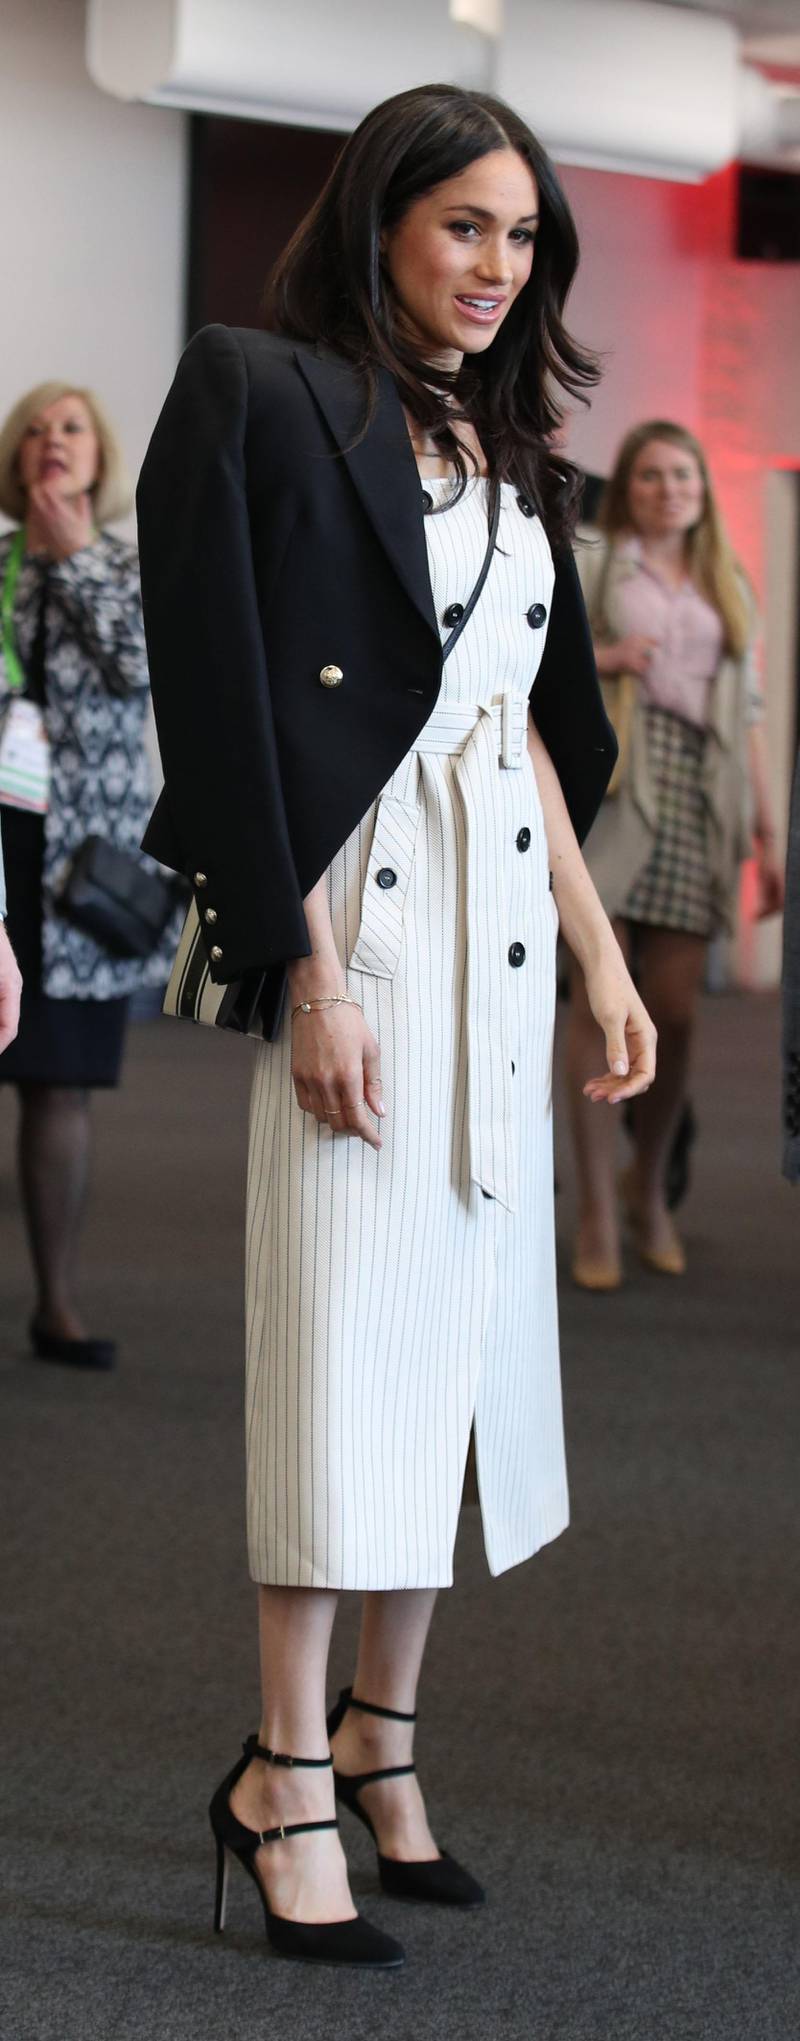 LONDON, UNITED KINGDOM - APRIL 18: Meghan Markle attends a reception with delegates from the Commonwealth Youth Forum at the Queen Elizabeth II Conference Centre, during the Commonwealth Heads of Government Meeting on April 18, 2018 in London, United Kingdom (Photo by Yui Mok - WPA Pool/Getty Images)